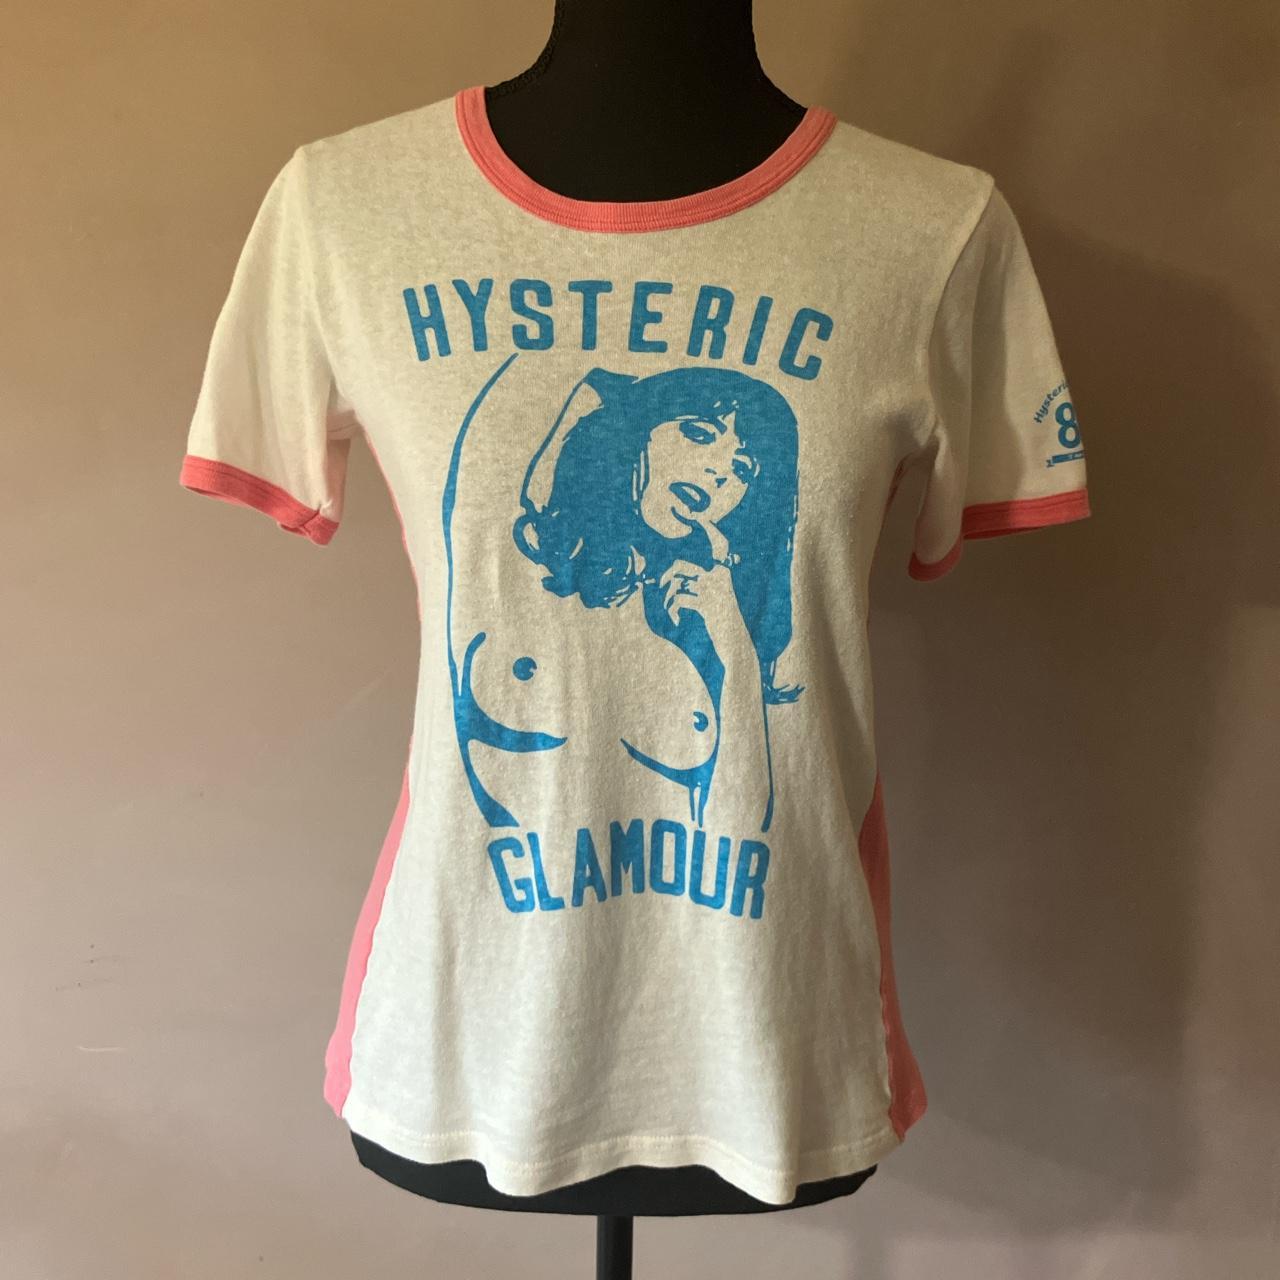 repop] Hysteric Glamour two toned tee featuring a... - Depop